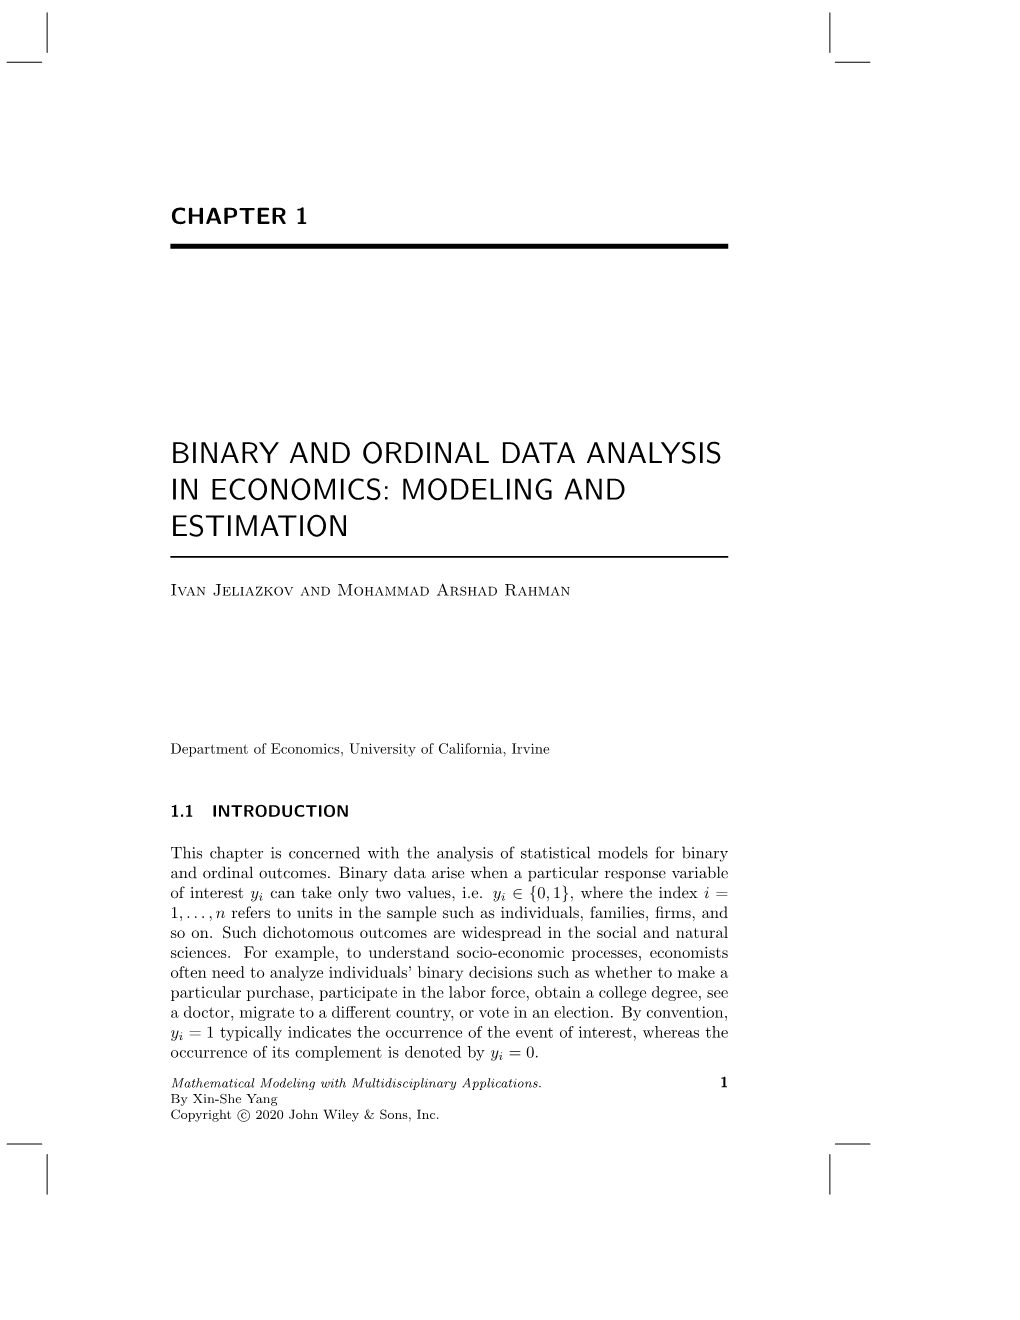 Binary and Ordinal Data Analysis in Economics: Modeling and Estimation